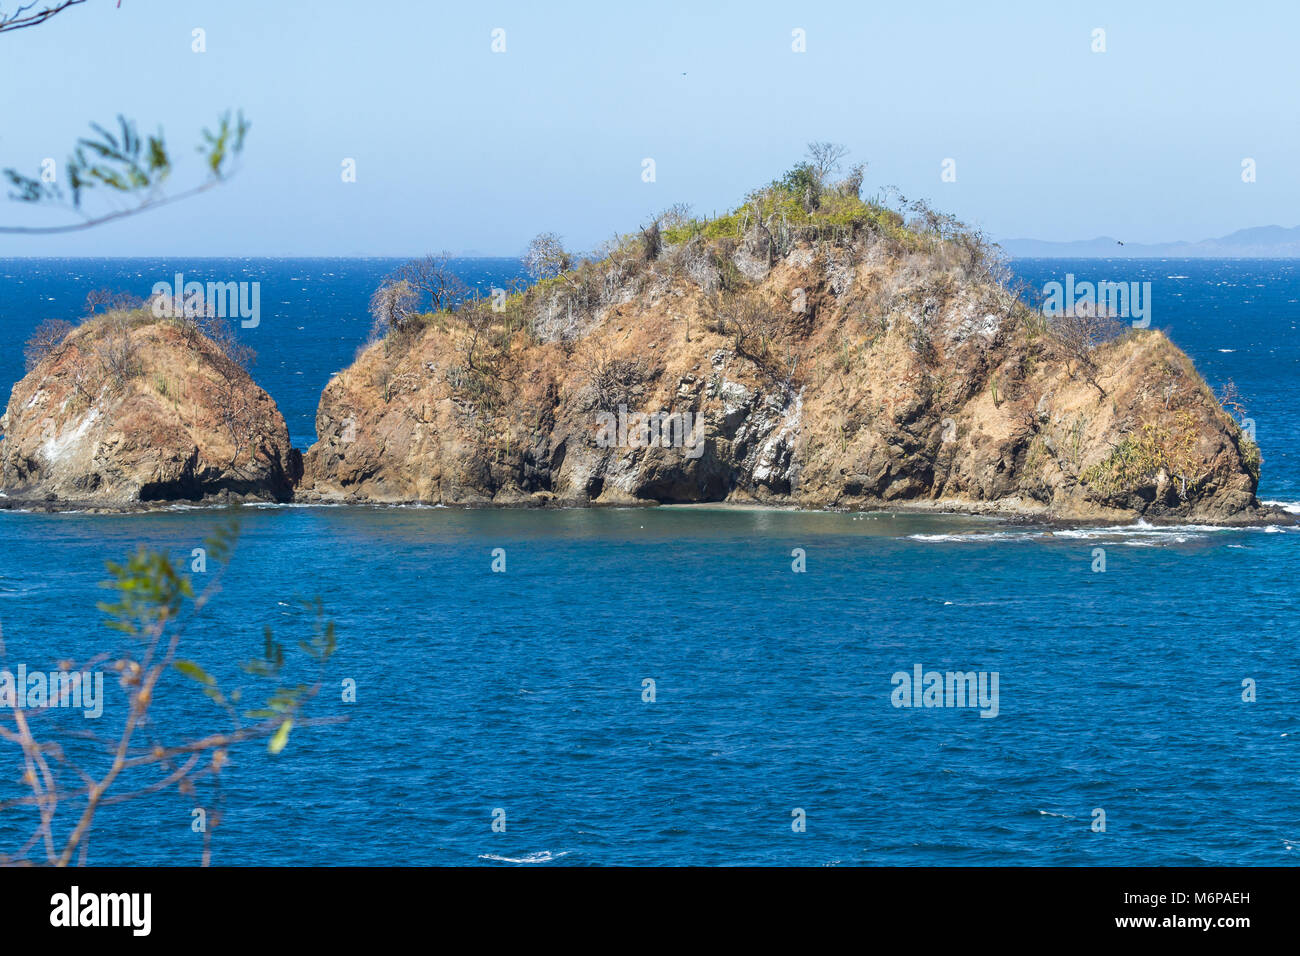 Montosa Island in the north pacific coast of Costa Rica, seen here from a view point near Calzon de Pobre beach Stock Photo